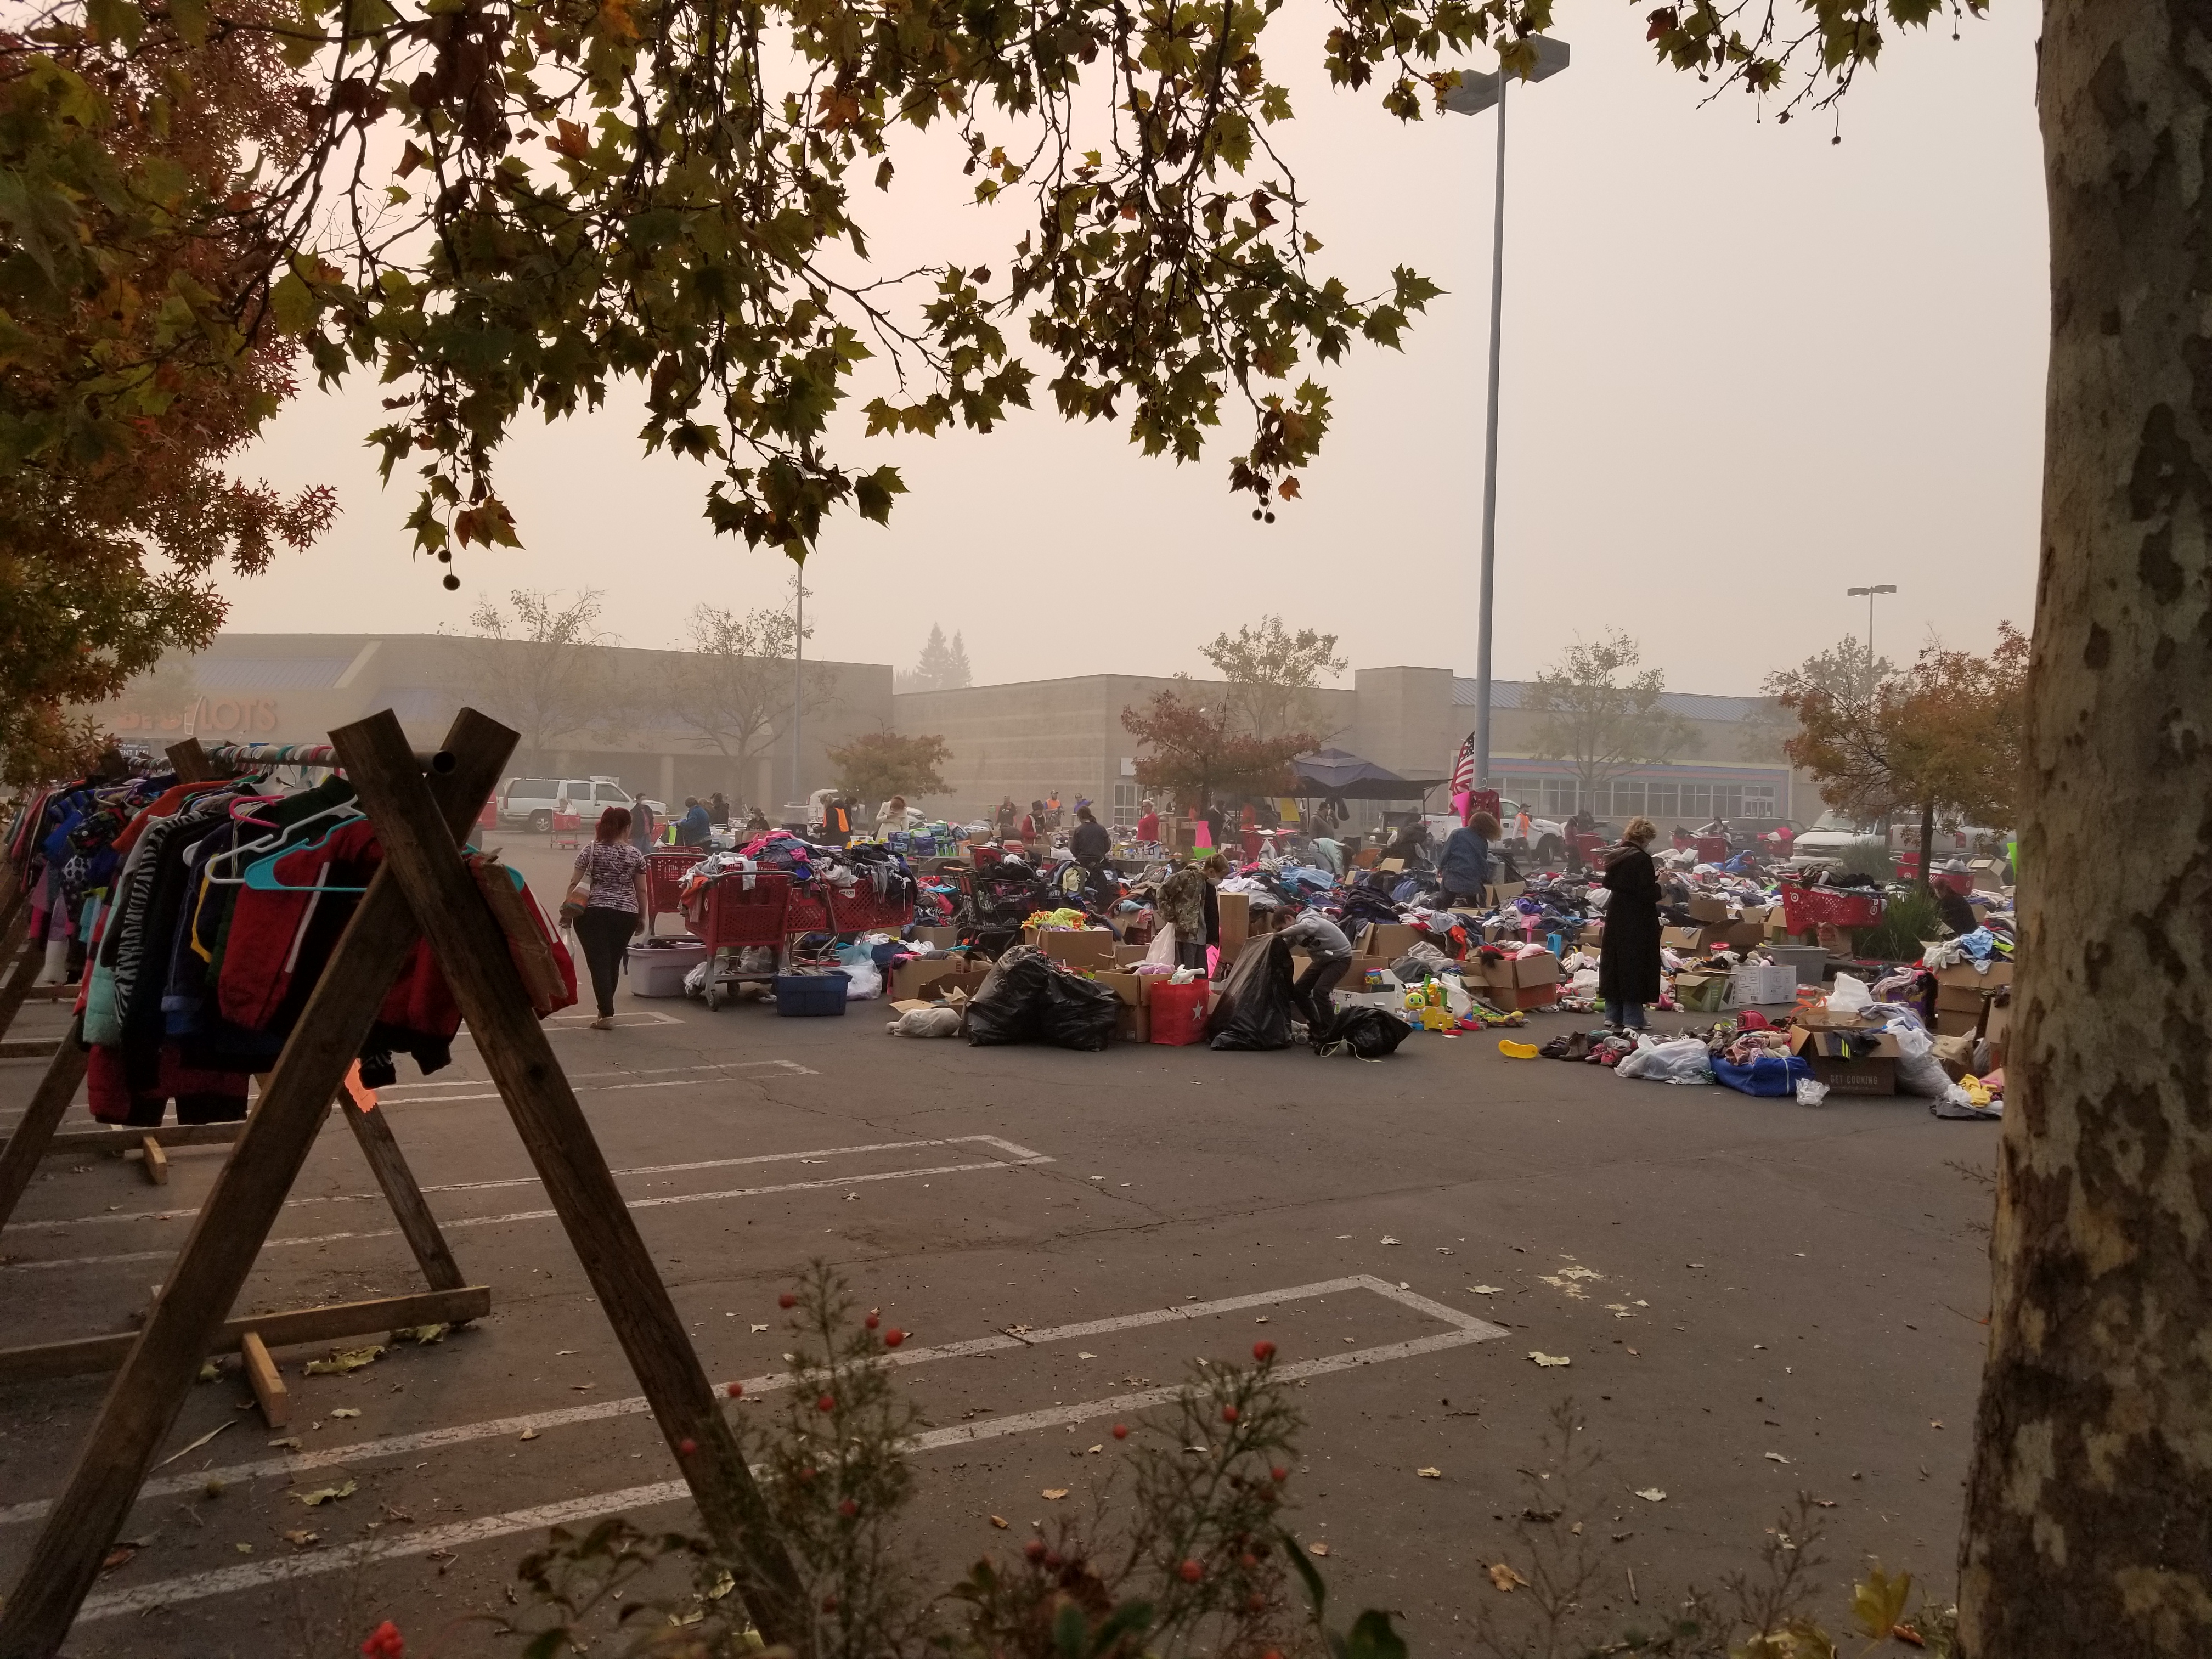 'Camp Fire' in Butte County Rages, Community Pulls Together to Help 